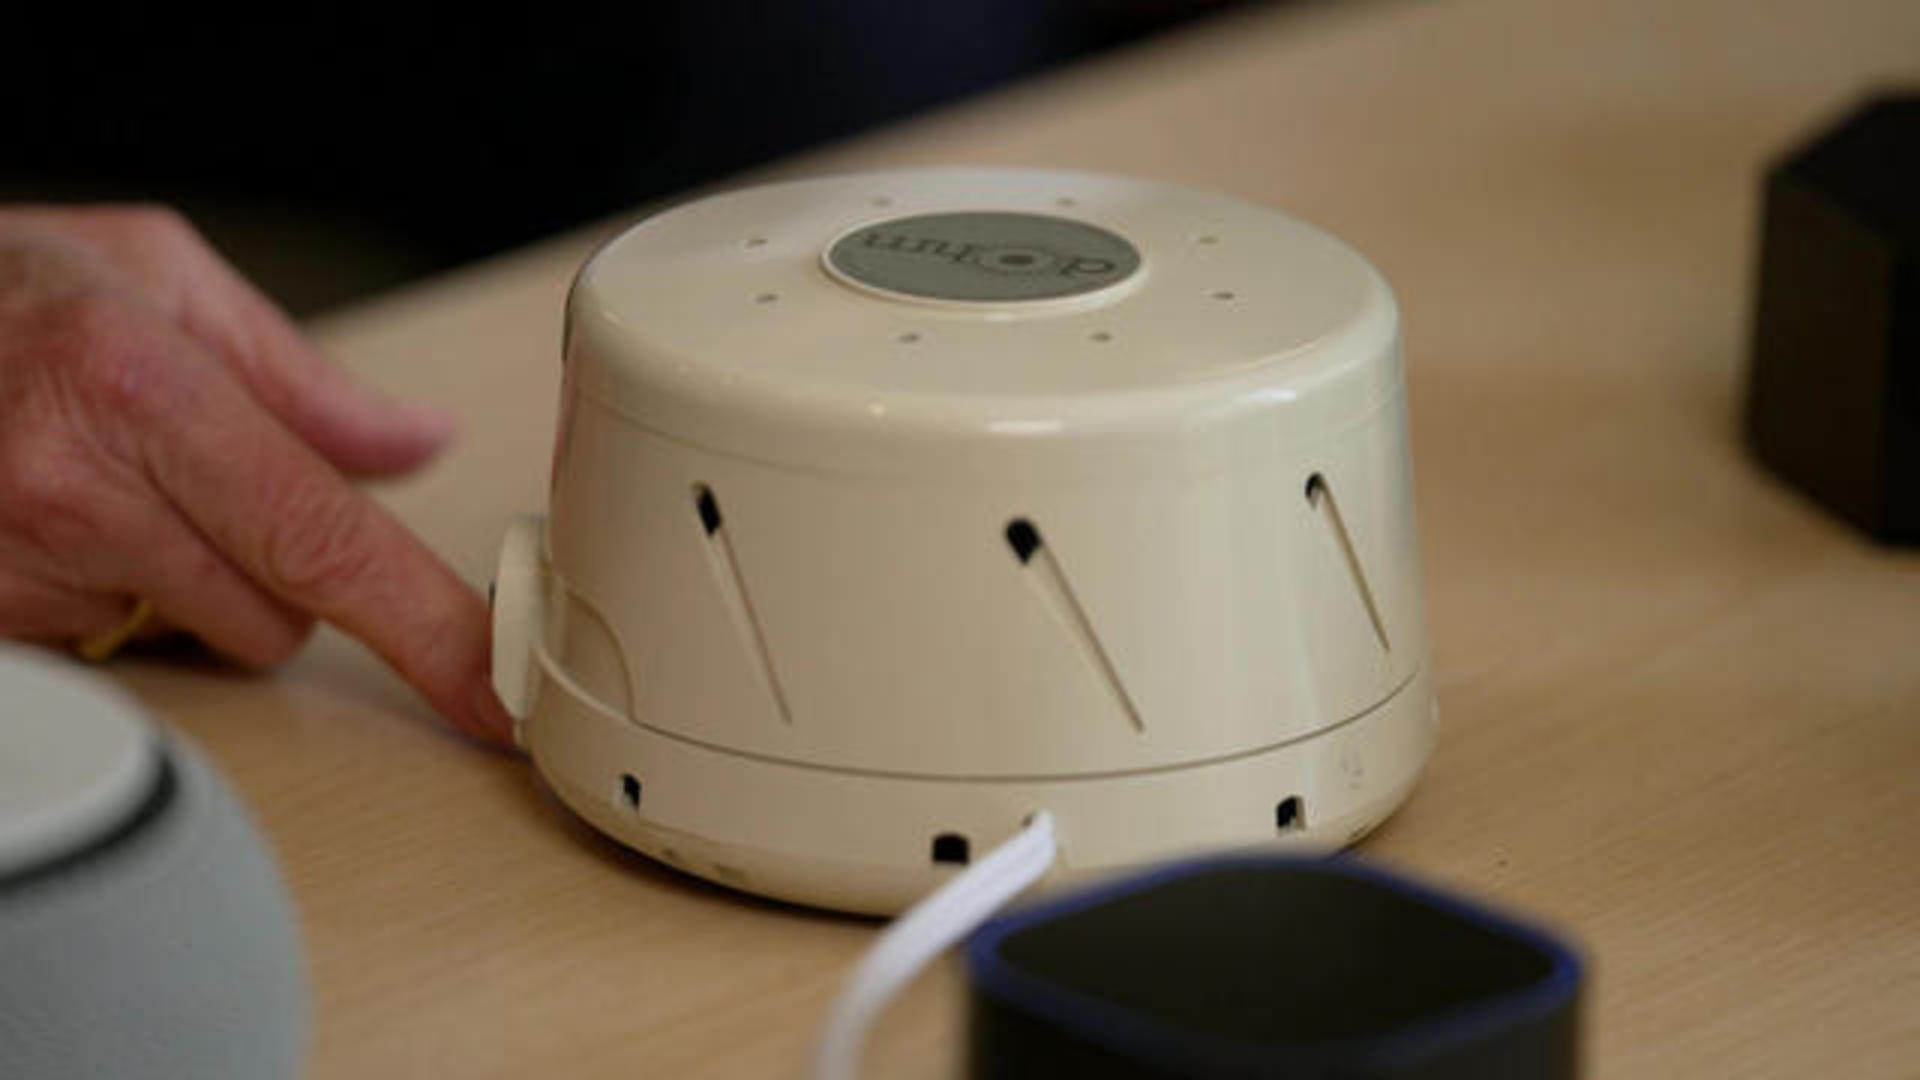 How effective are white noise machines? - CBS News